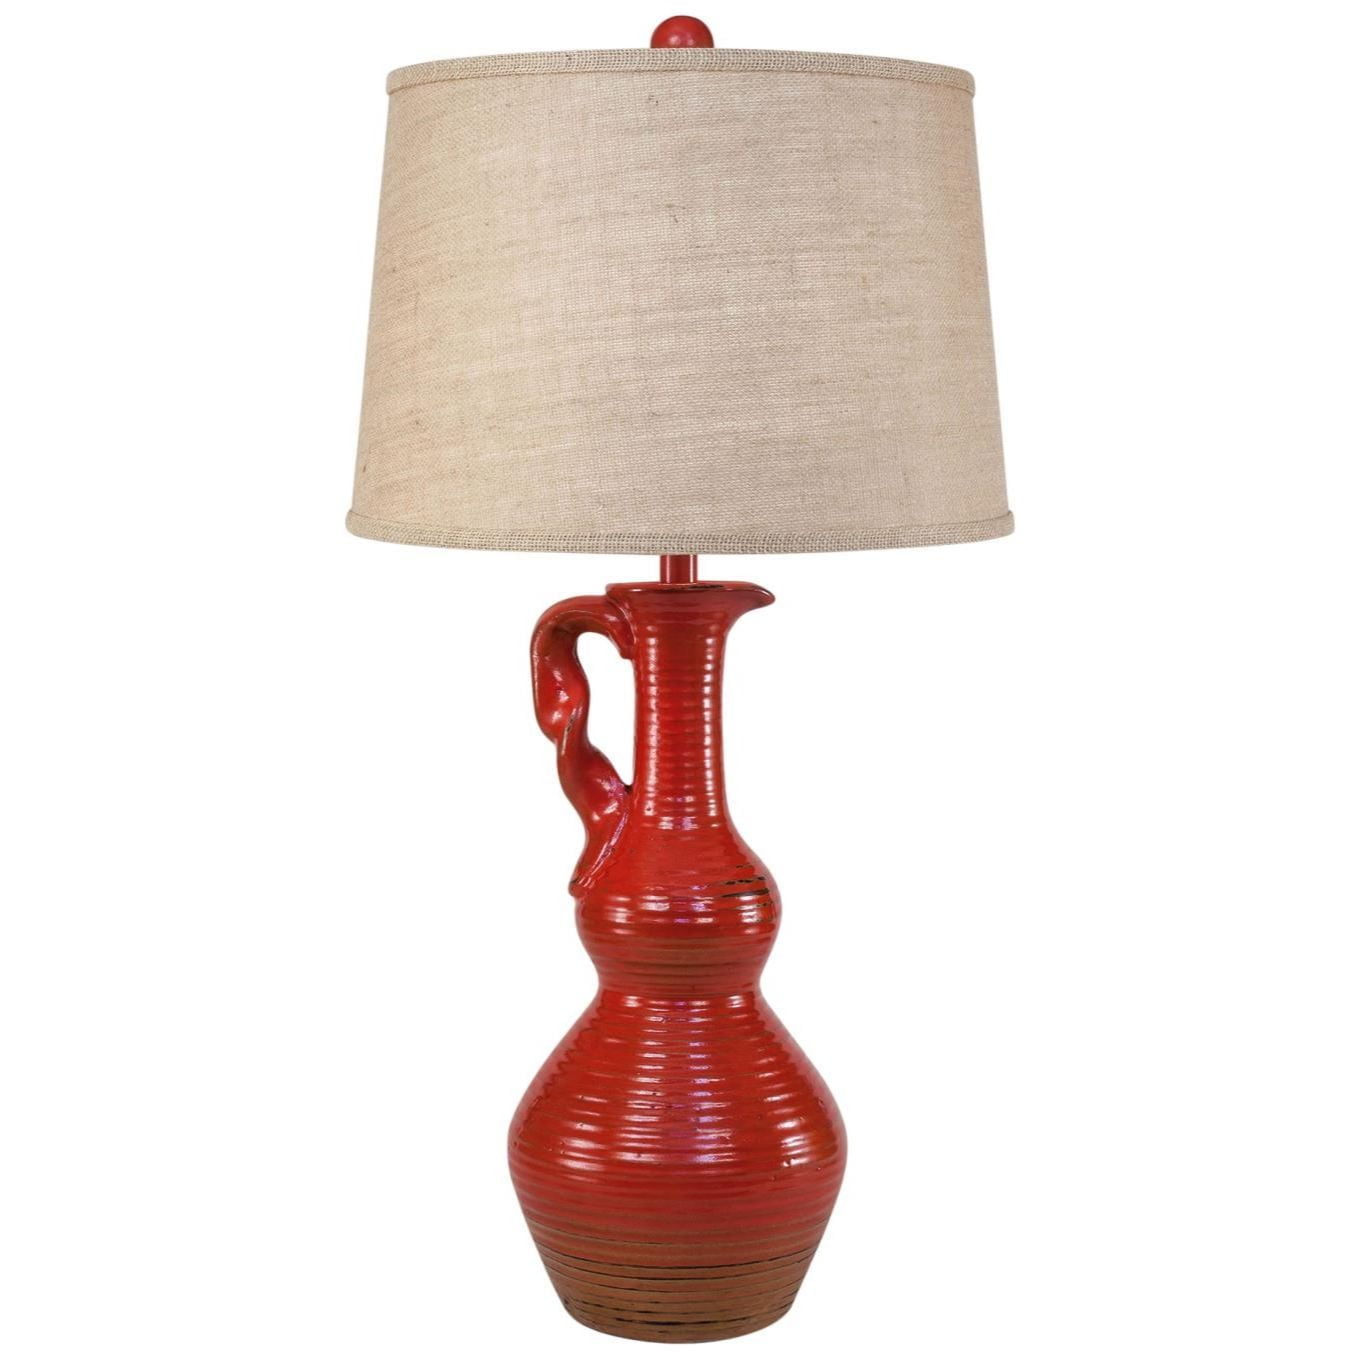 Hourglass Pitcher Table Lamp